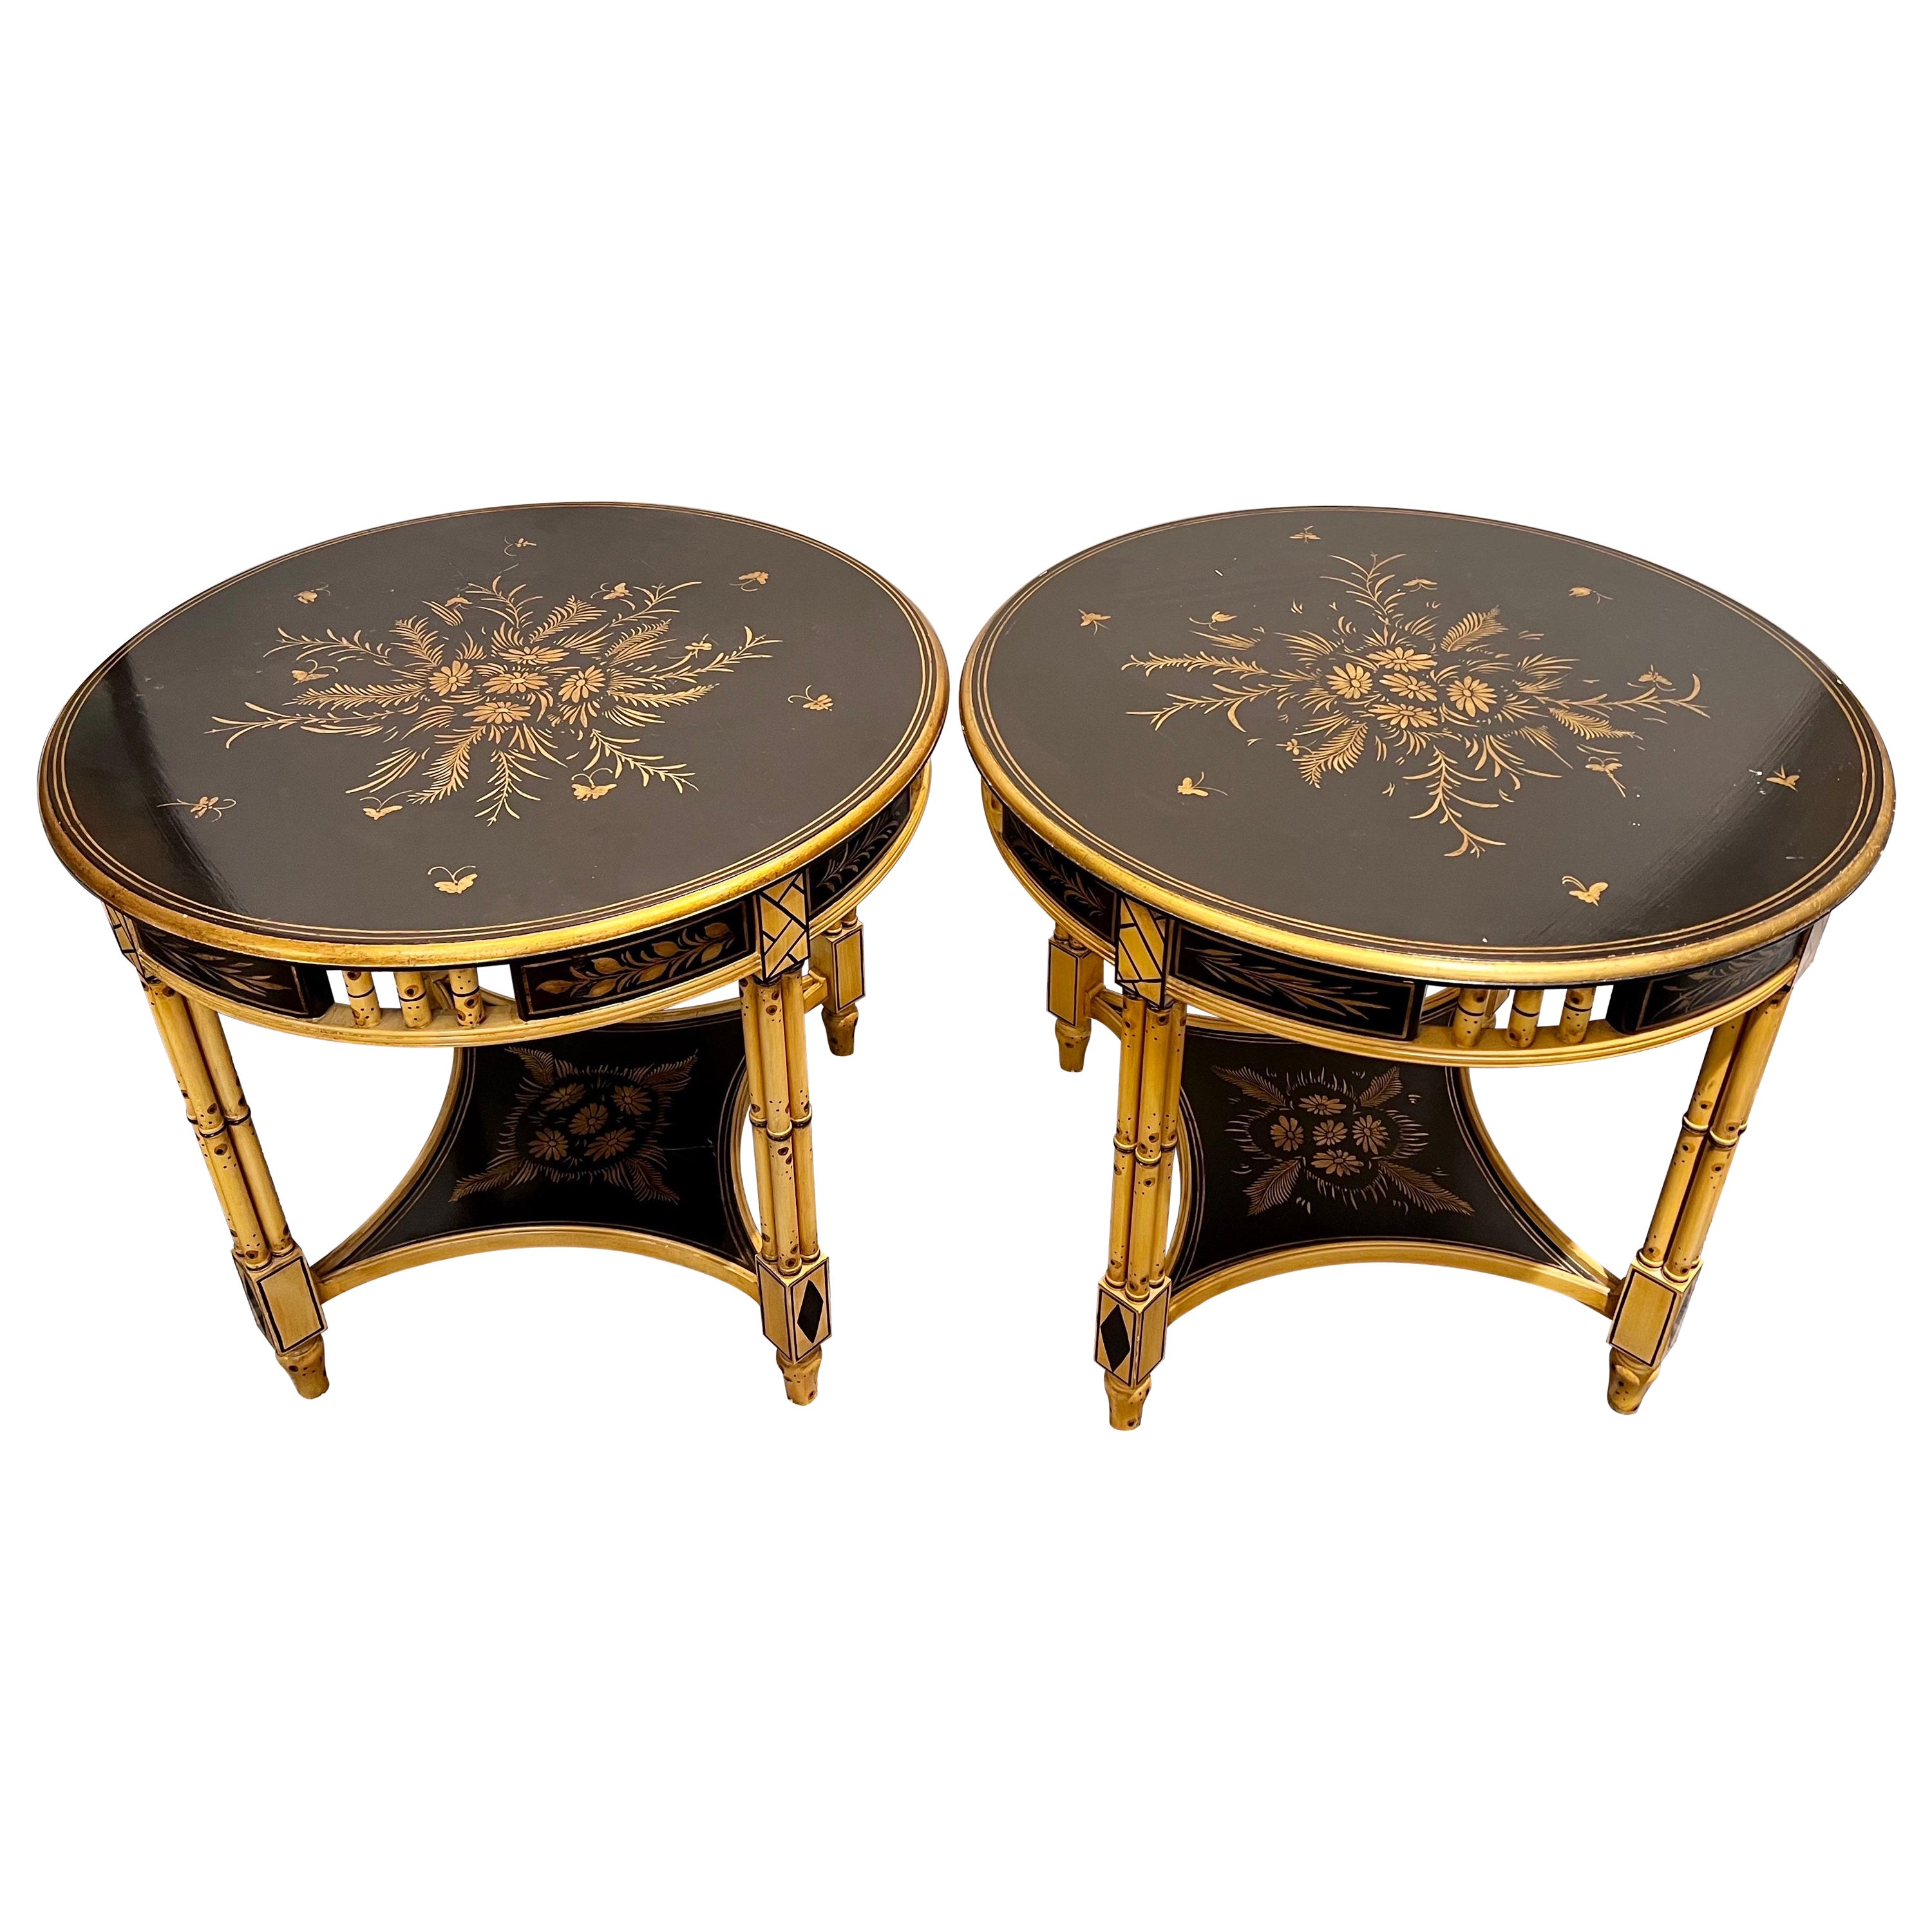 Pair of Chinoiserie Black Lacquered and Gold Faux Bamboo Round Tables